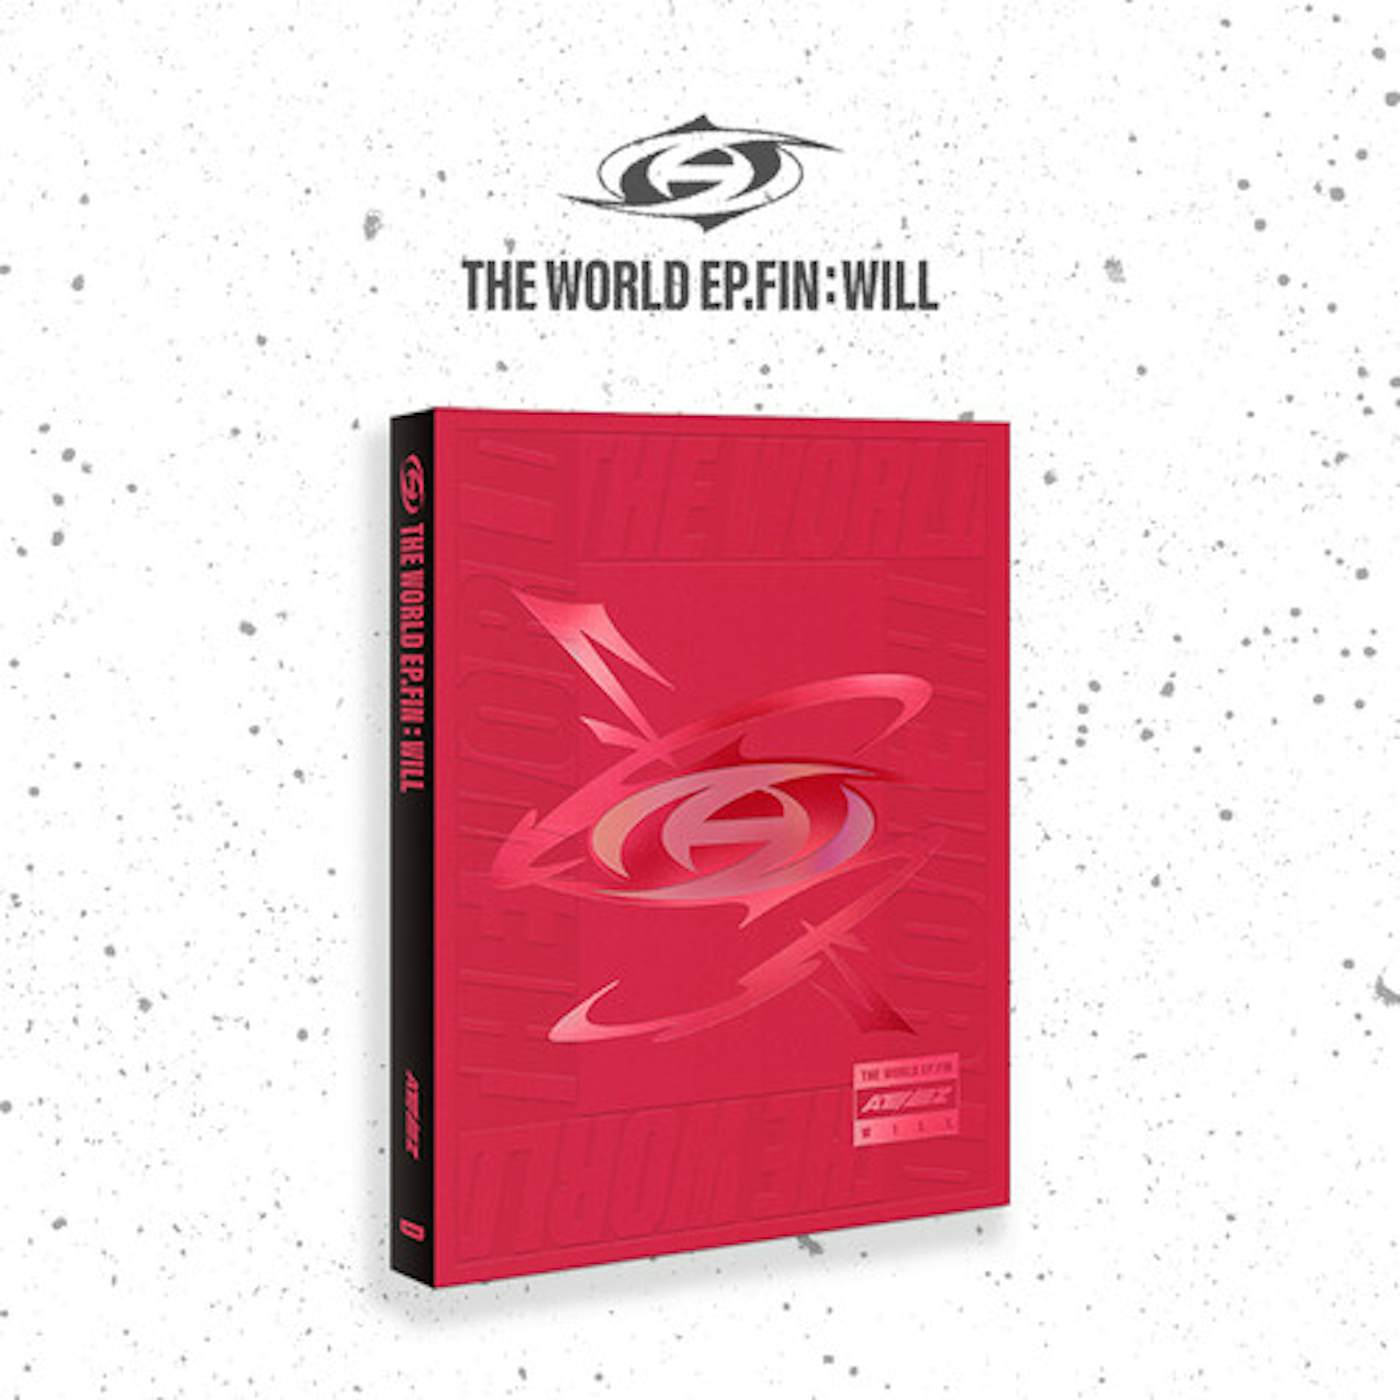 ATEEZ WORLD EP.FIN : WILL - (Z VER.) (US BASIC) CD